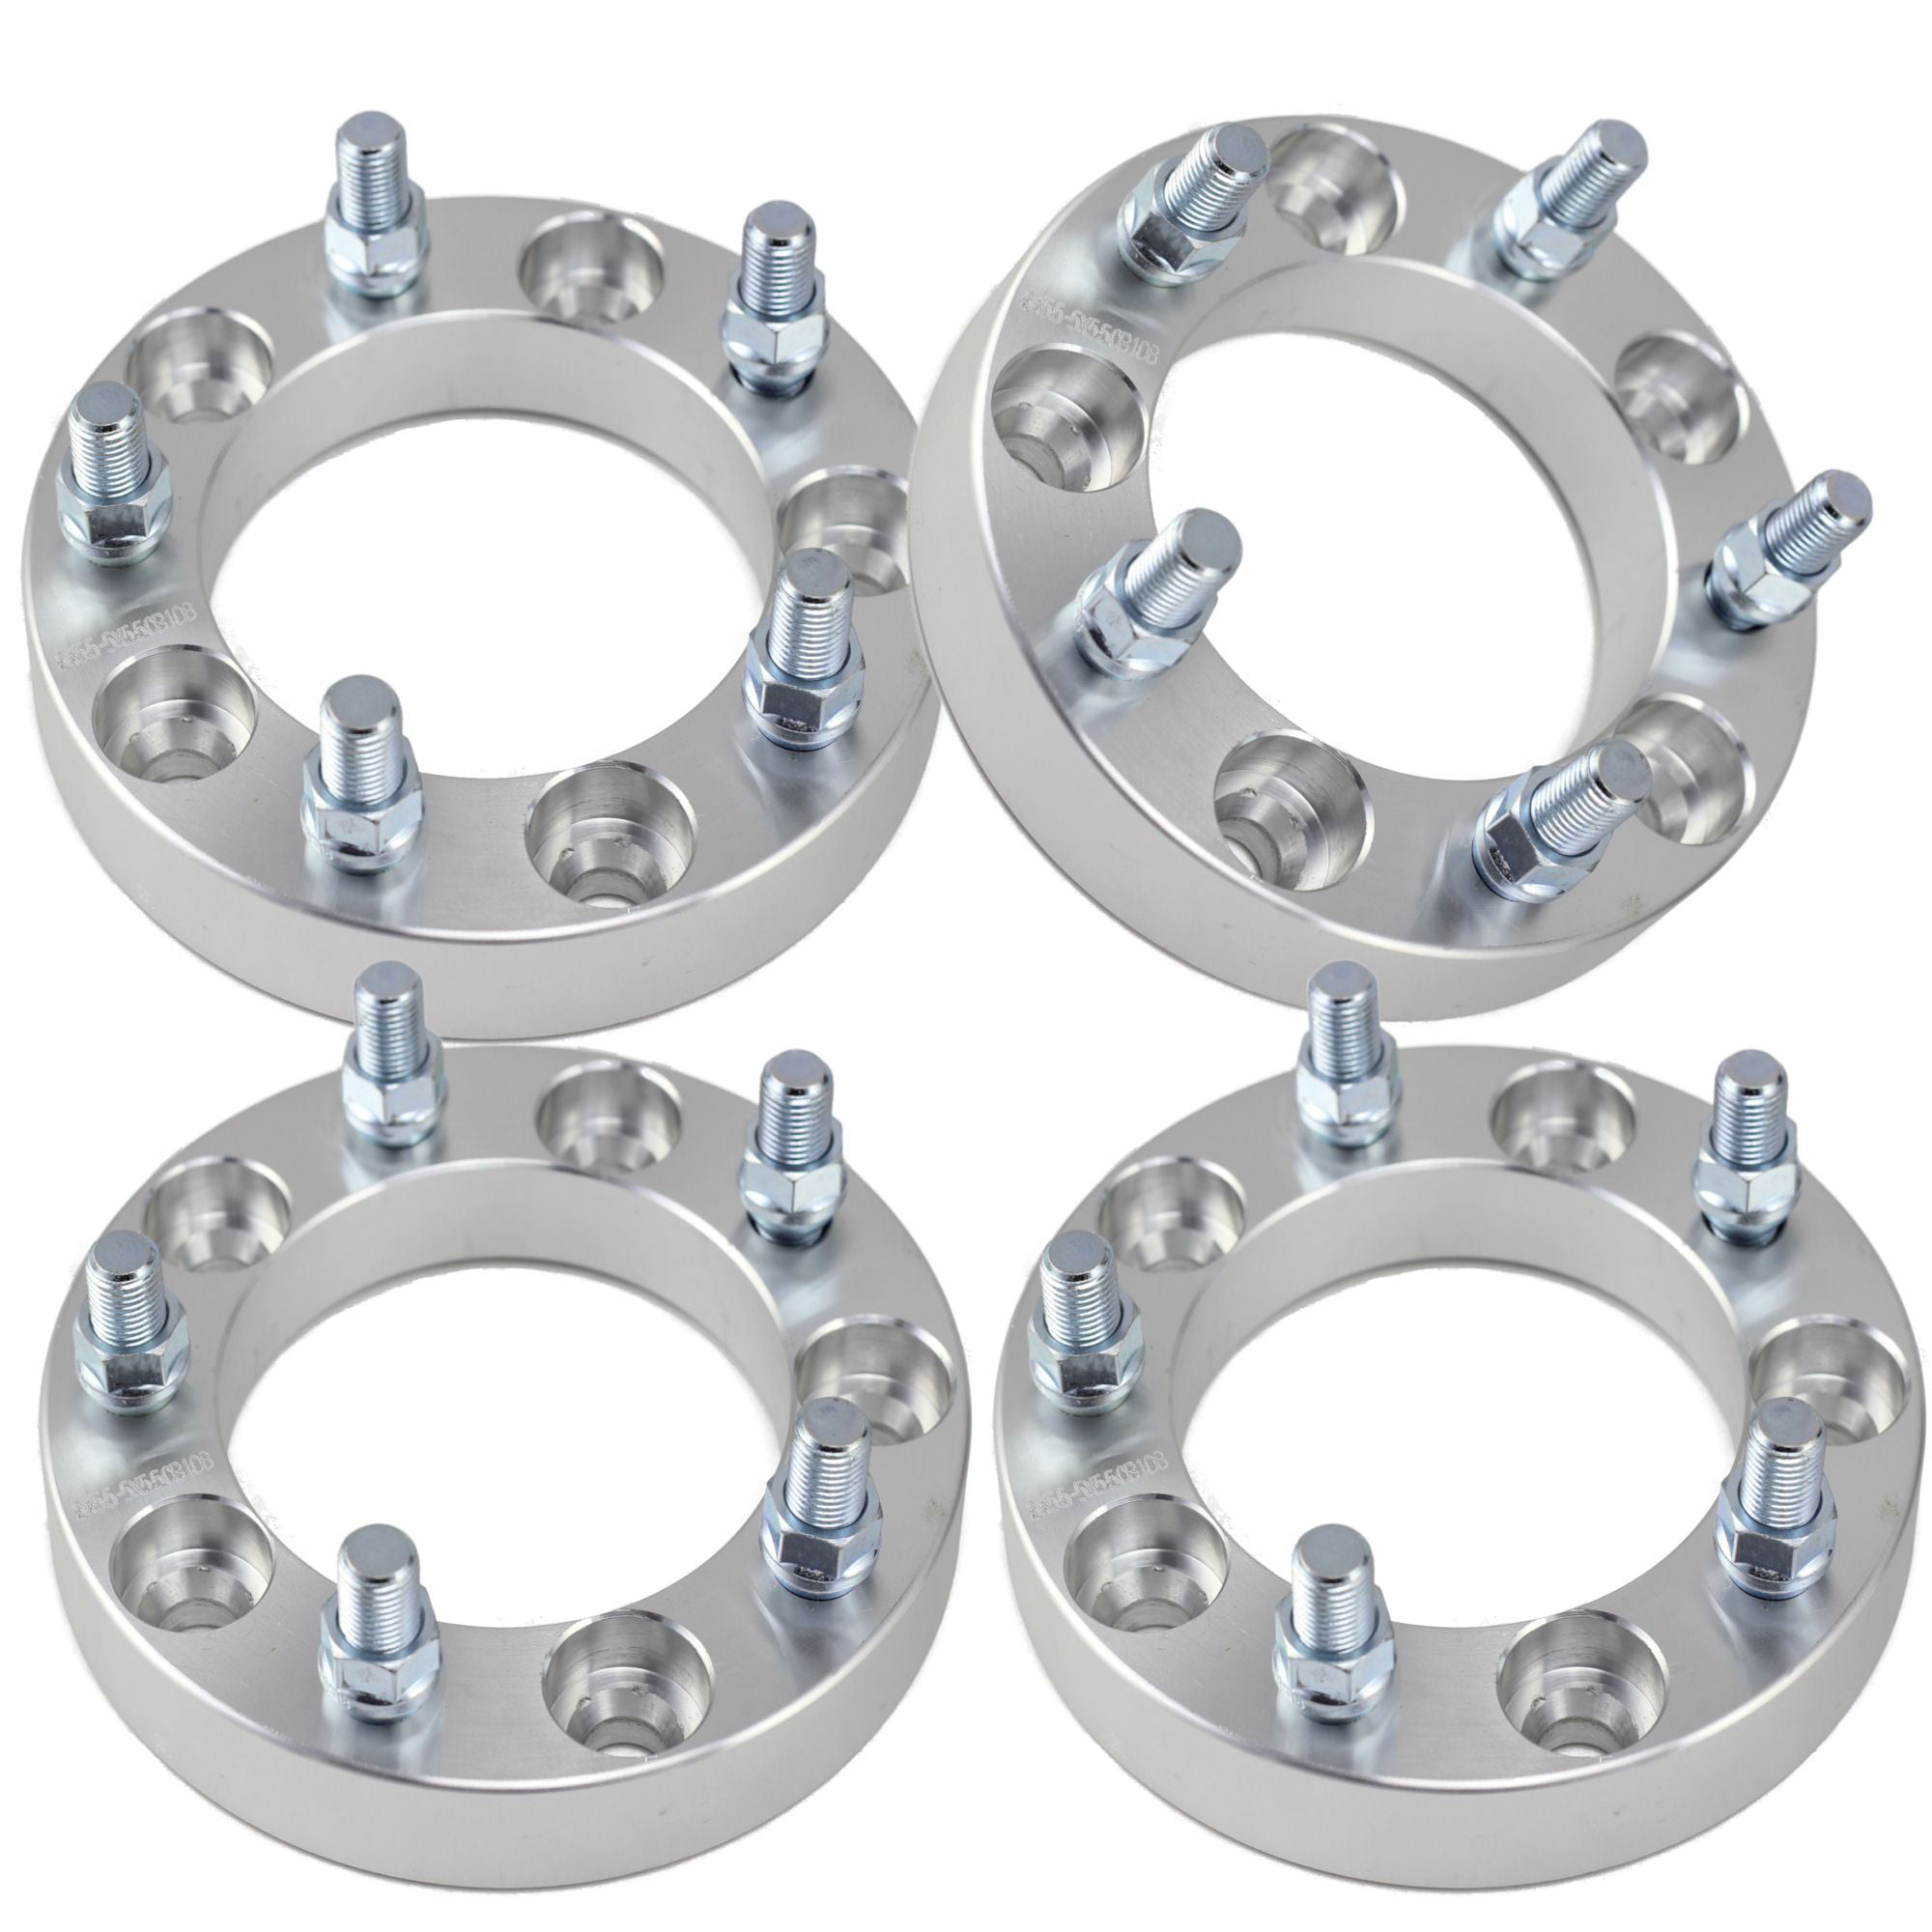 4 Pcs Wheel Adapters 5x5,5 to 5x5,5 ¦ Jeep CJ Dodge Ram Ford Bronco Spacers...